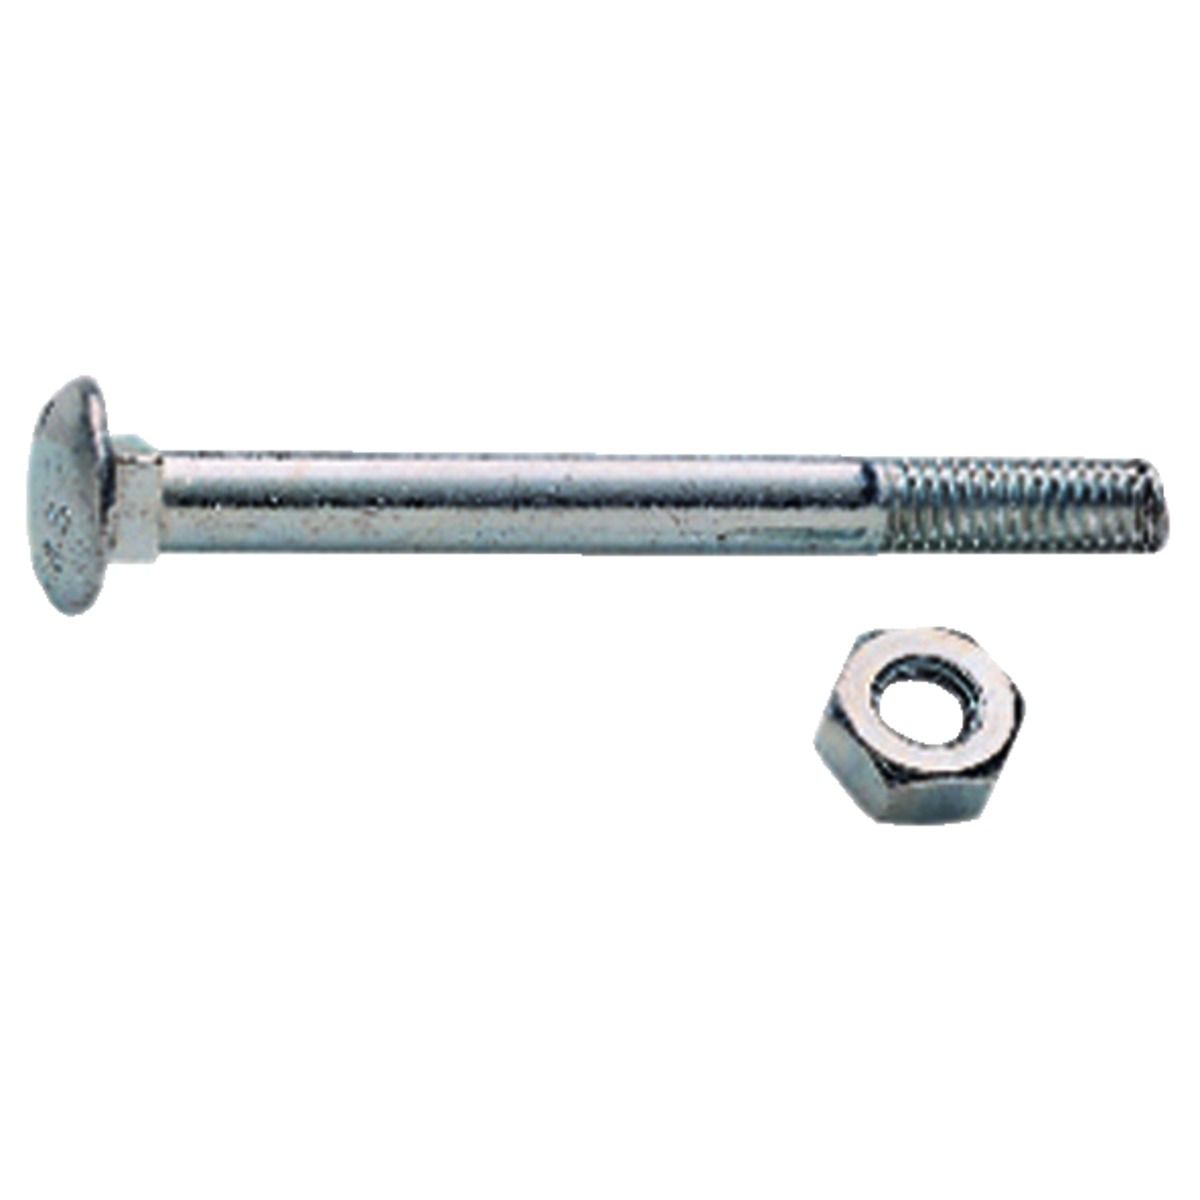 Image of Wickes Carriage Bolt Nut & Washer - M12 x 200mm Pack of 2